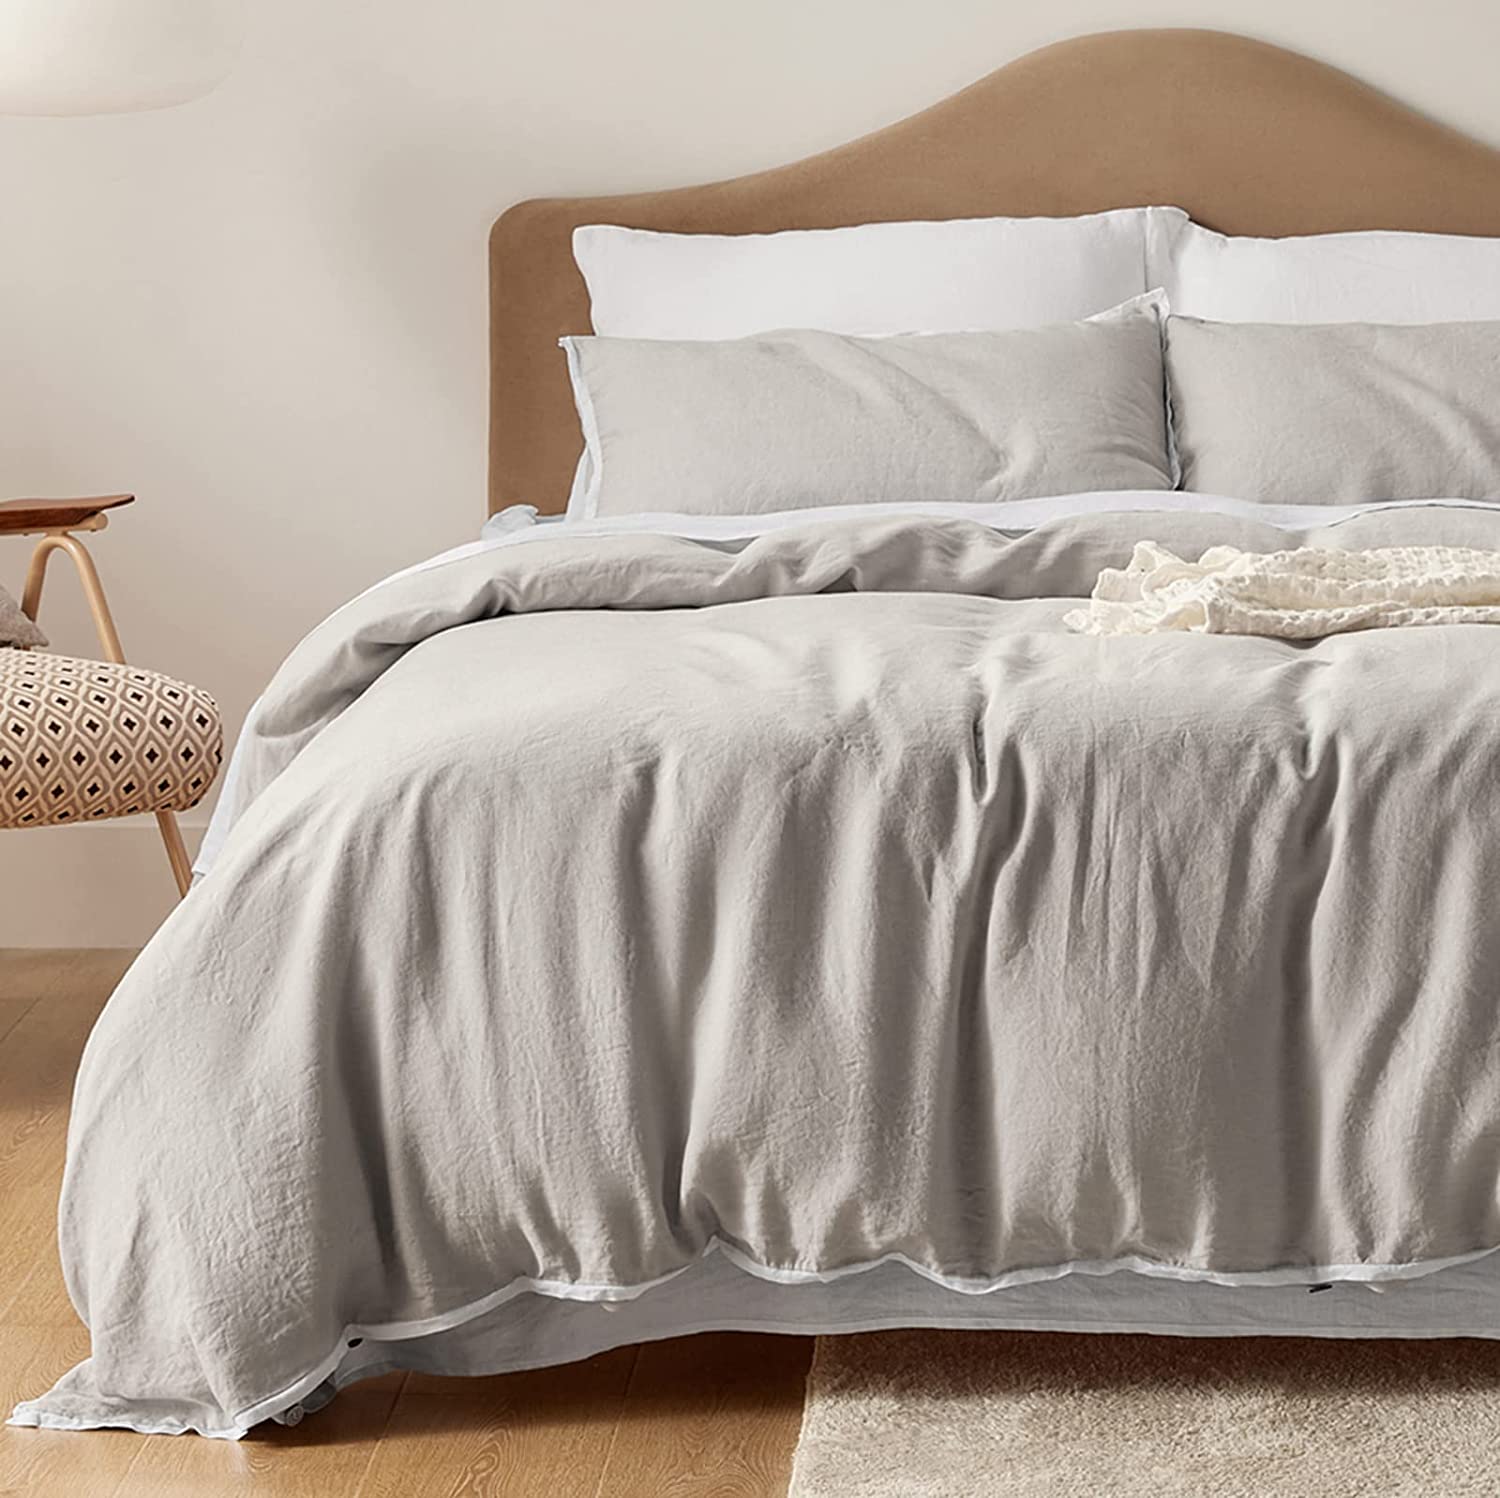 Price:$134.99  Linen Duvet Cover King Size - 100% French Linen 3 Piece Flax Bedding Set Comforter Duvet Covers King for Hot Sleepers, Organic Soft Cooling Breathable, 1 Duvet Cover and 2 Pillowcases : Home & Kitchen